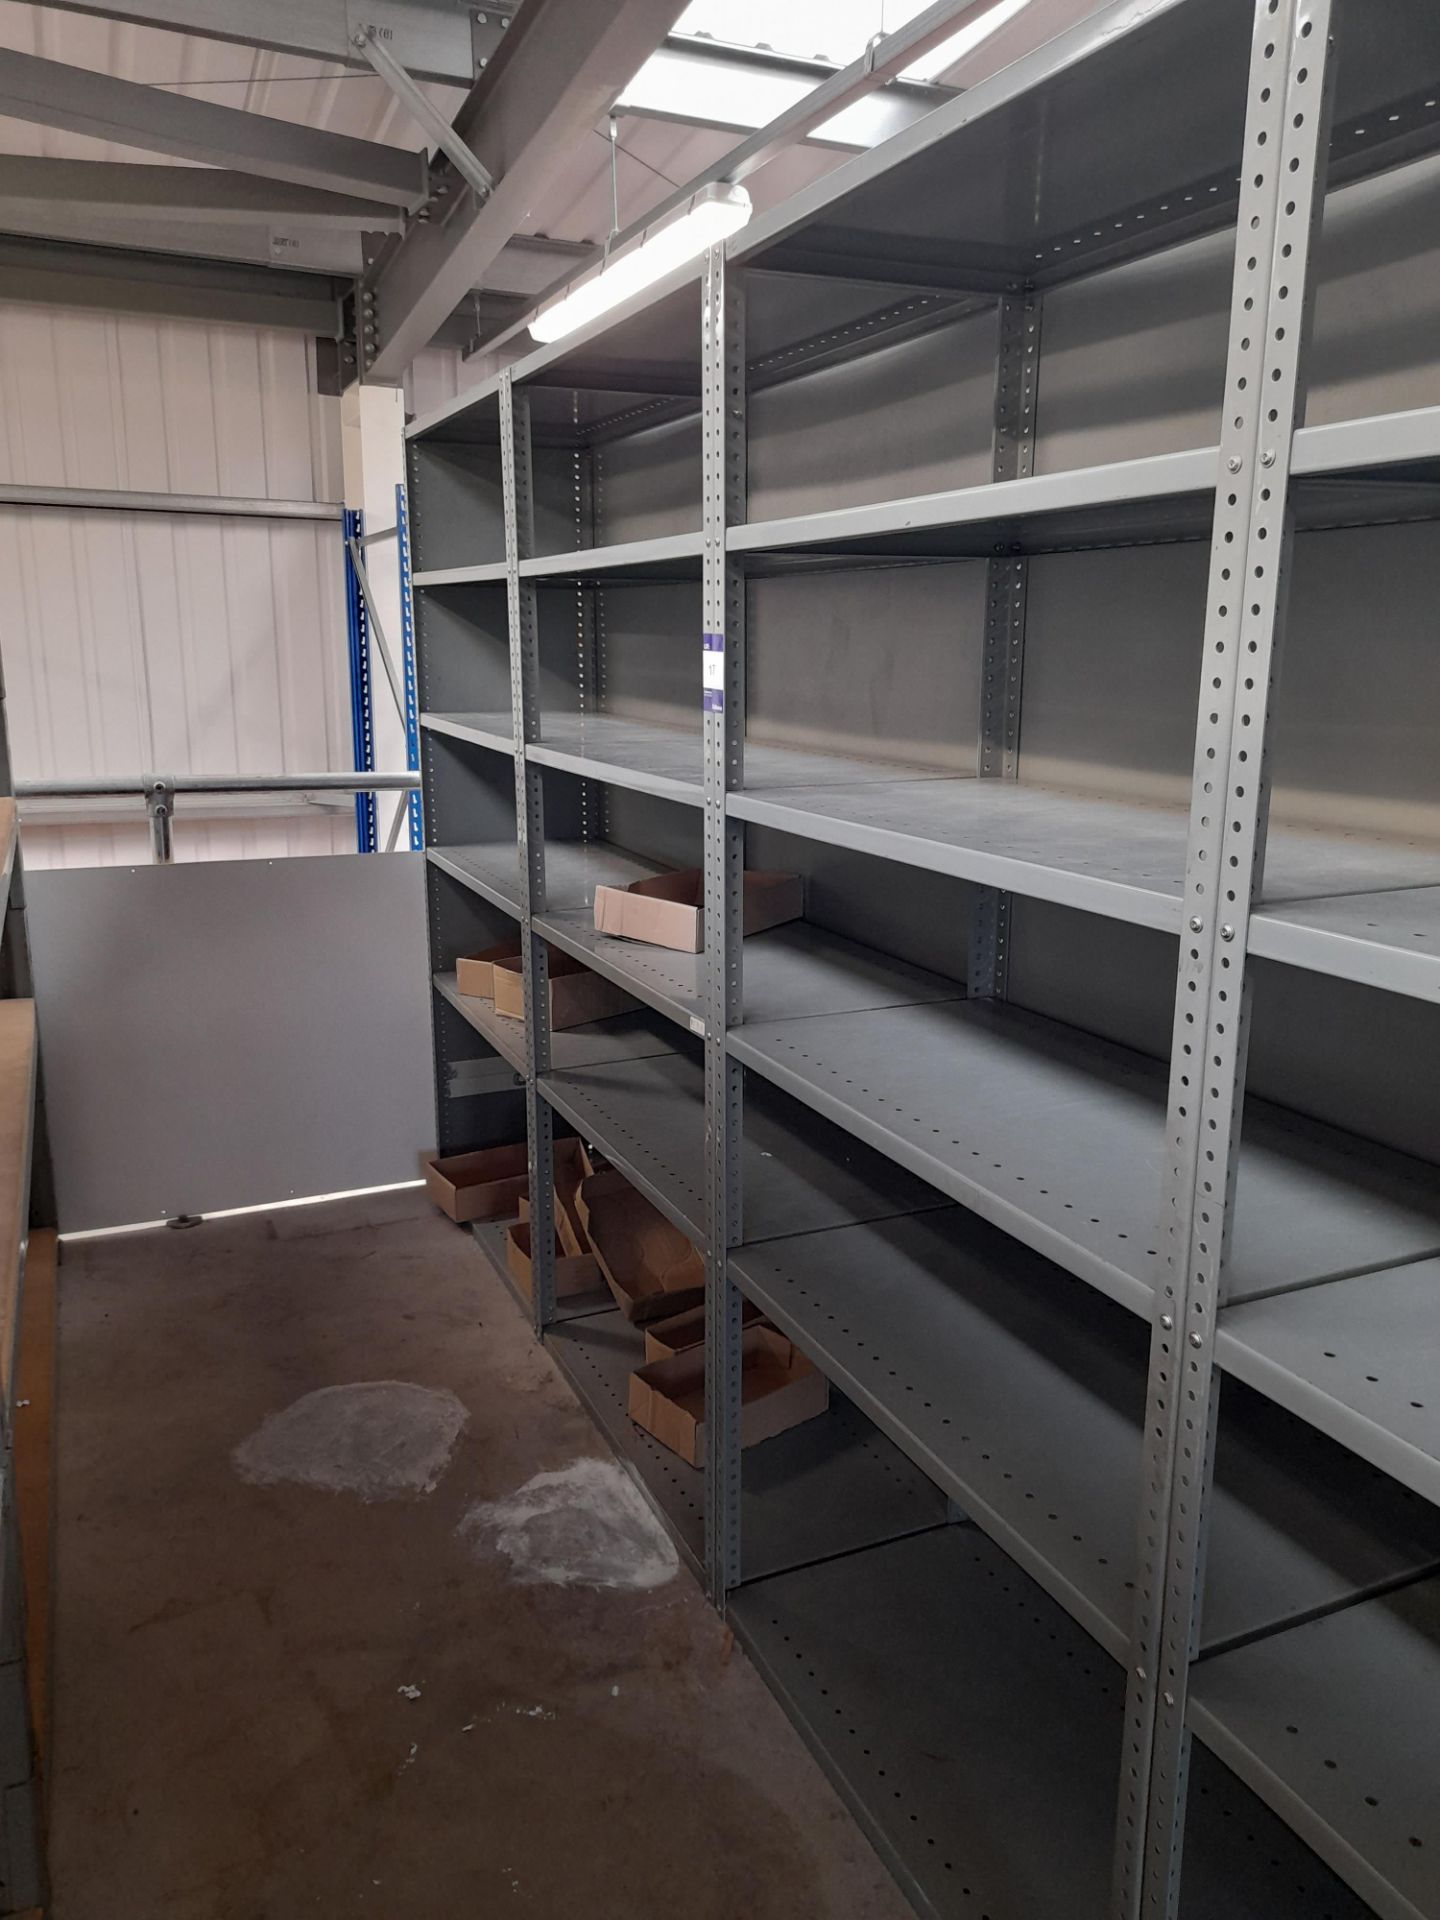 3 x Metal shelving units, approx. 1900mm high, 910mm wide, 475mm depth - located on mezzanine floor